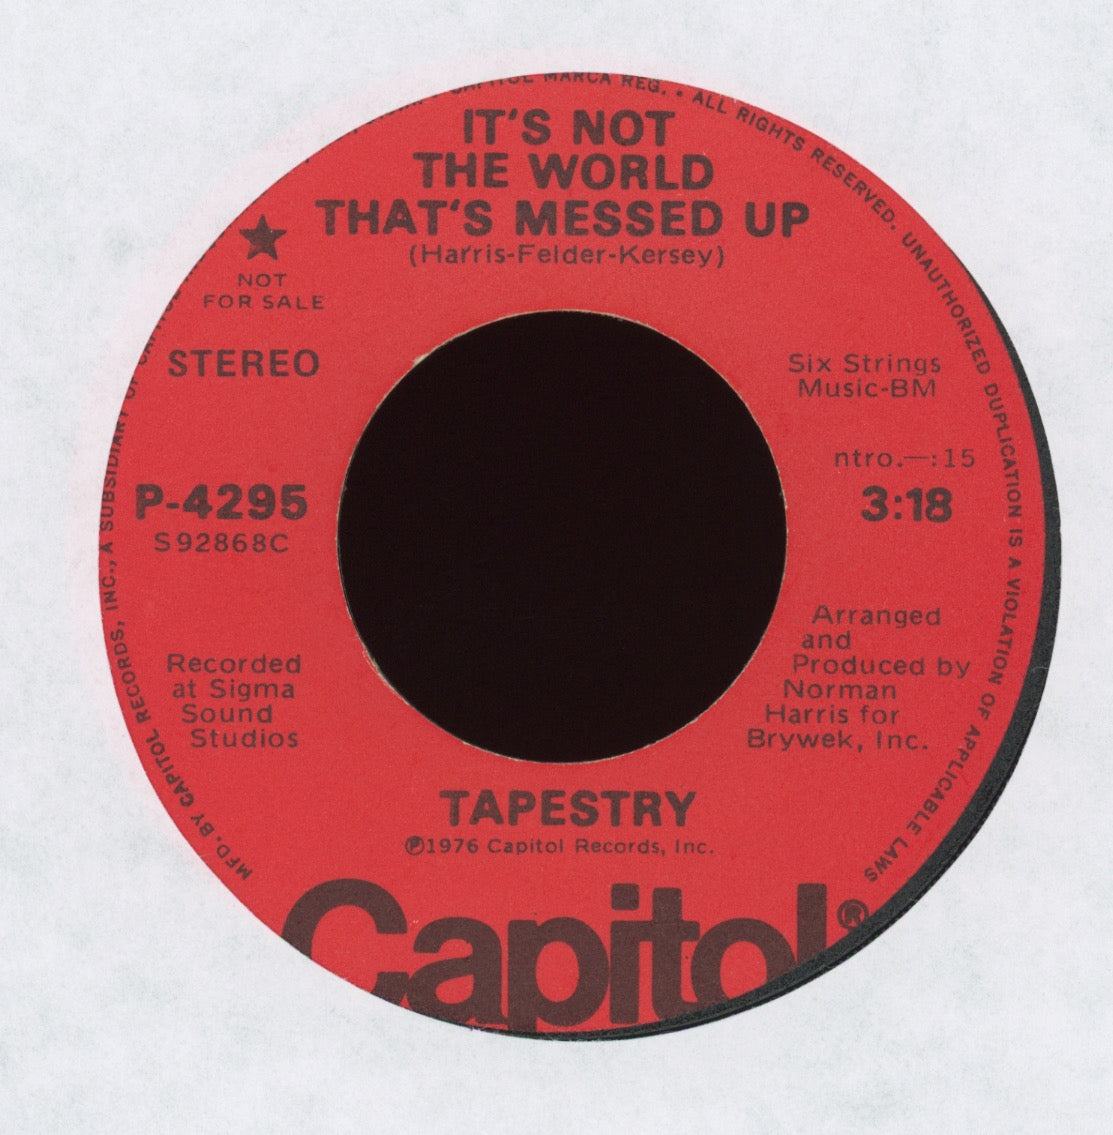 Tapestry - It's Not The World That's Messed Up on Capitol Promo